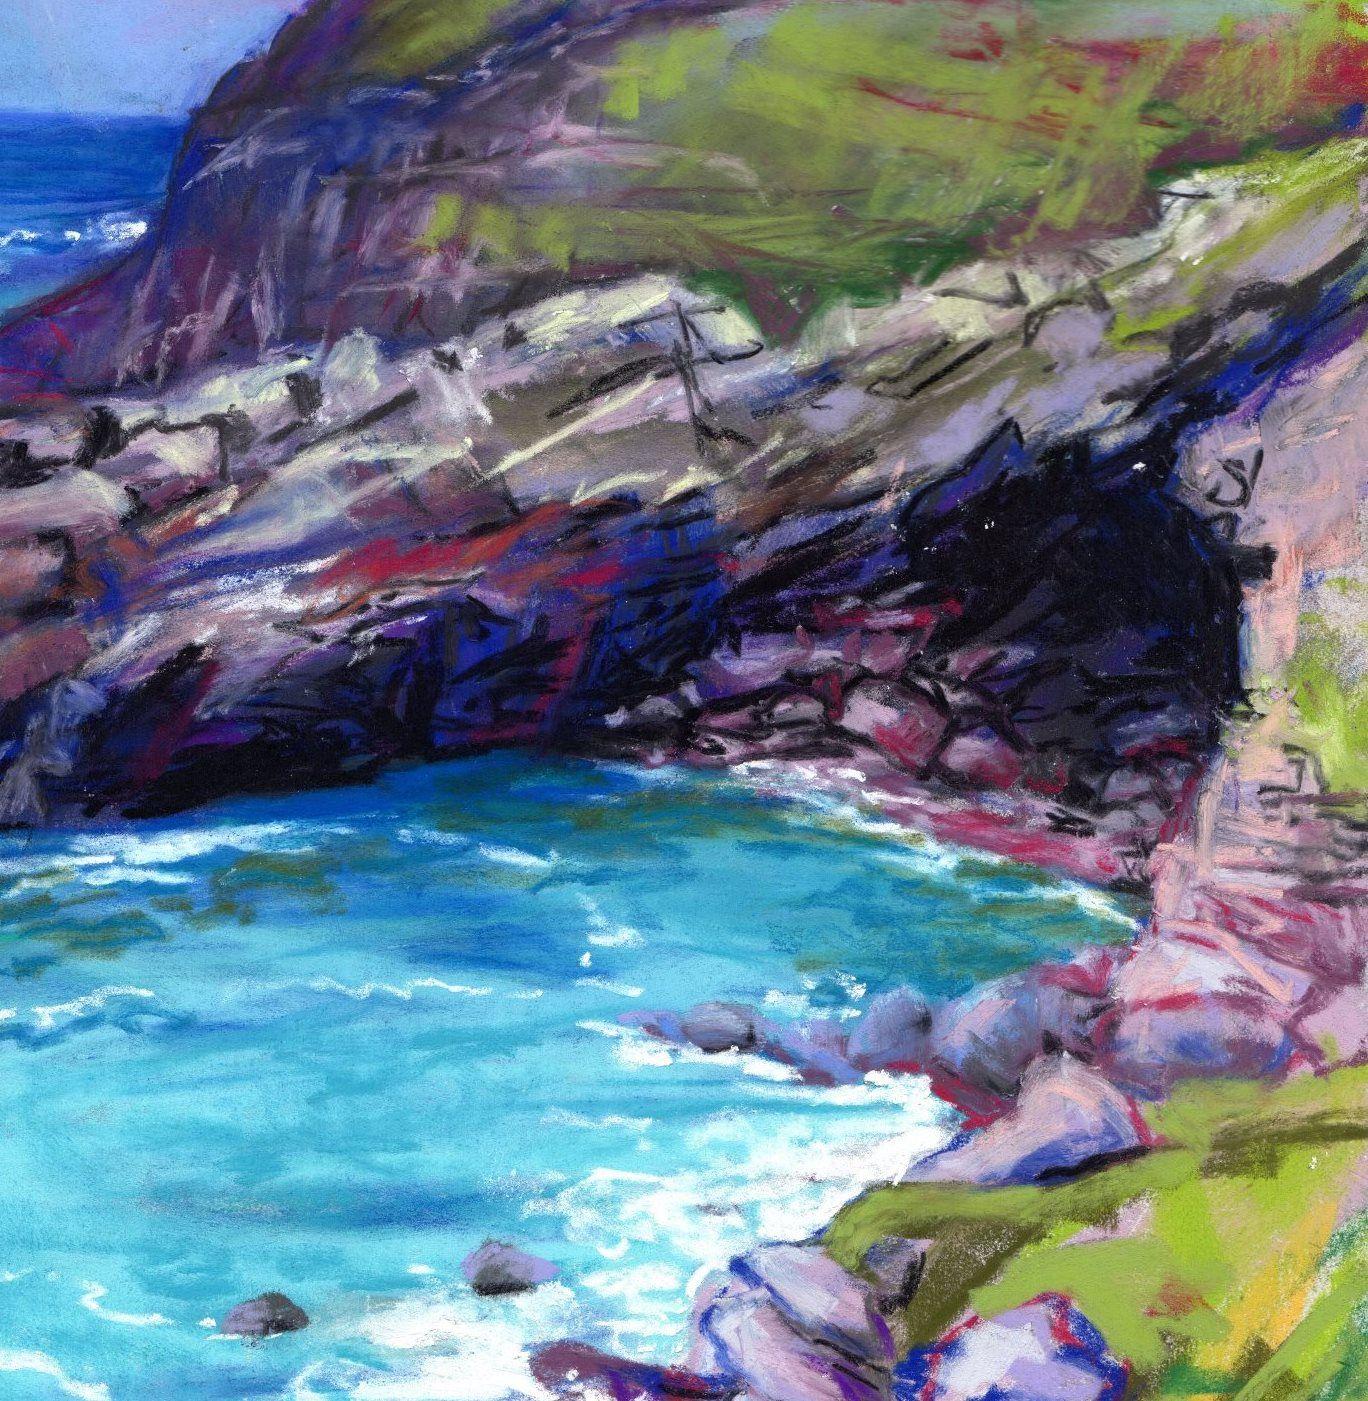 Modern contemporary impressionism.    This painting was started on location at Tintagel on the Cornish coast. I had walked further on from the ruined Castle (legendary home to King Arthur) and sat down to capture this beautiful scene of the rocky